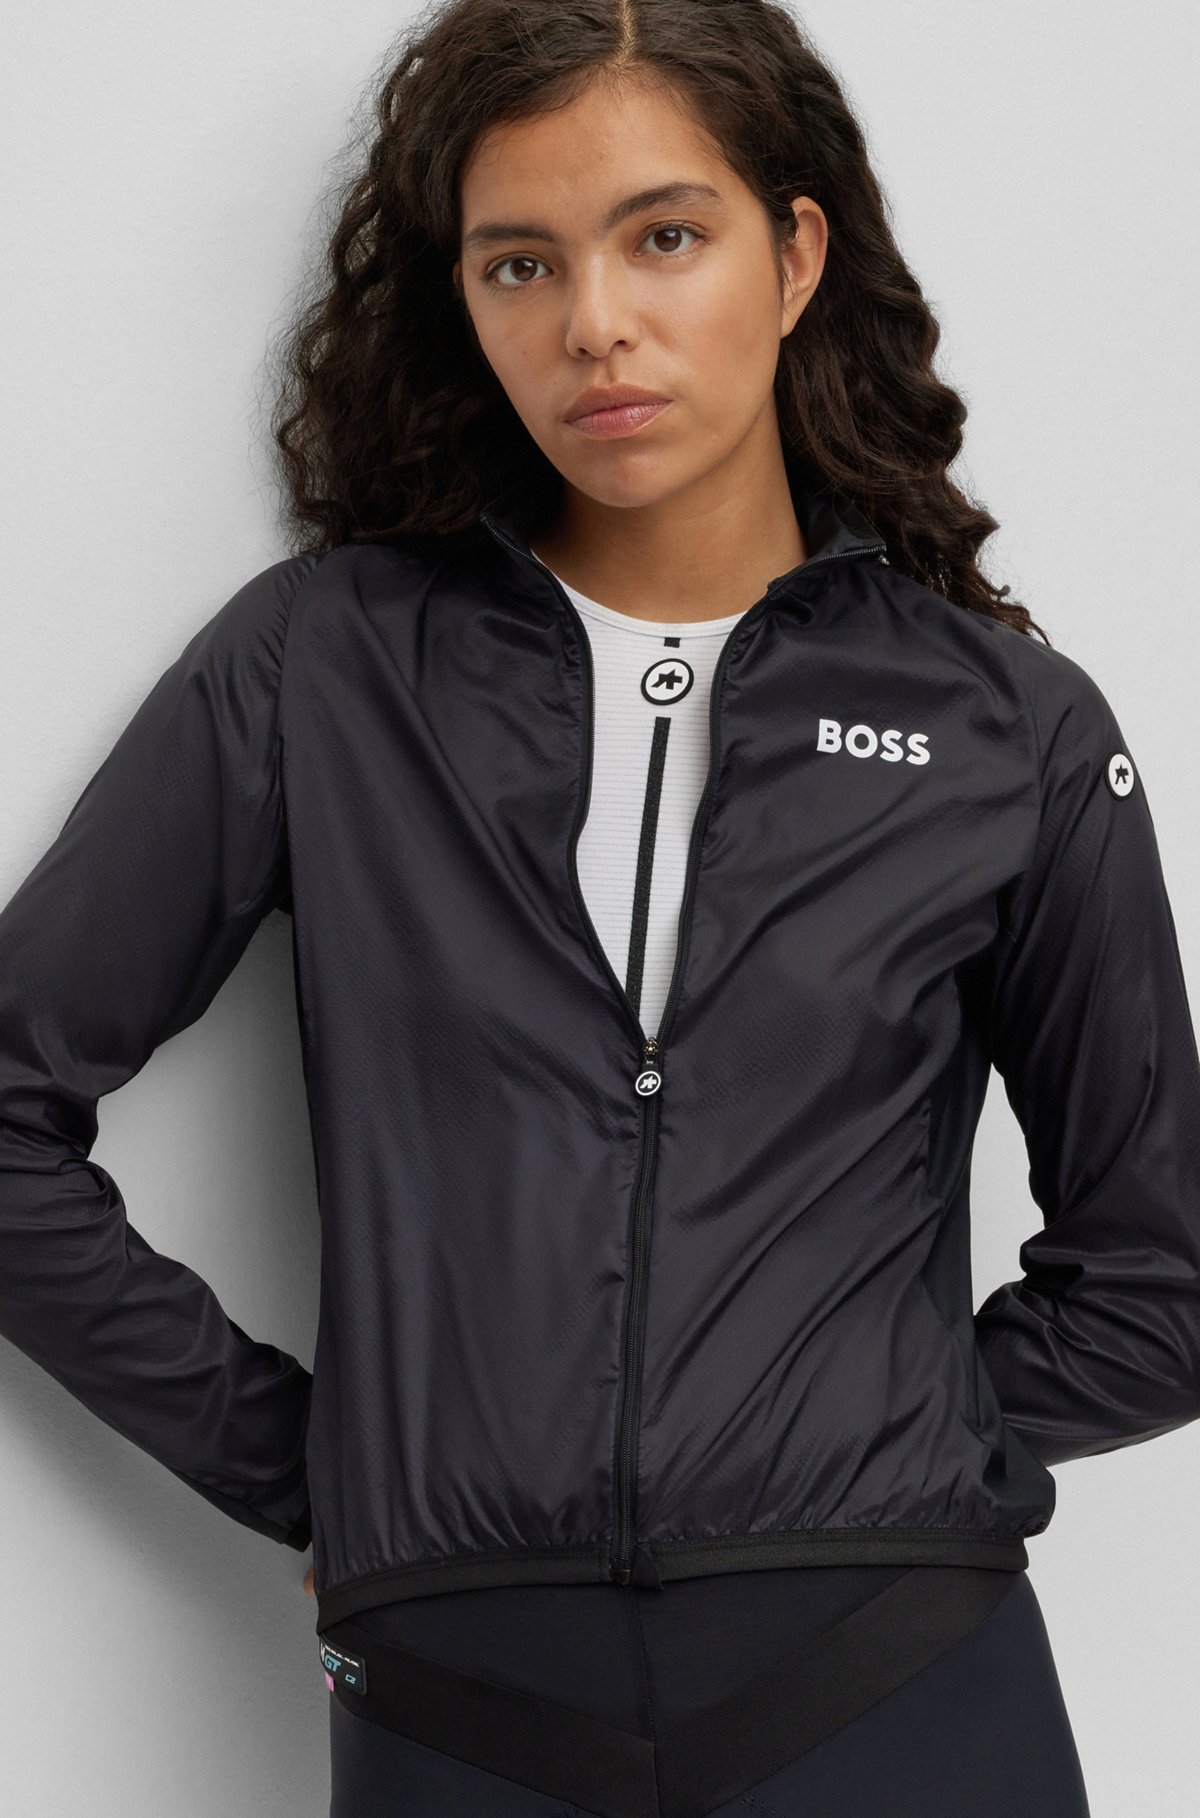 BOSS x ASSOS packable wind jacket with stretch-mesh inserts, Black